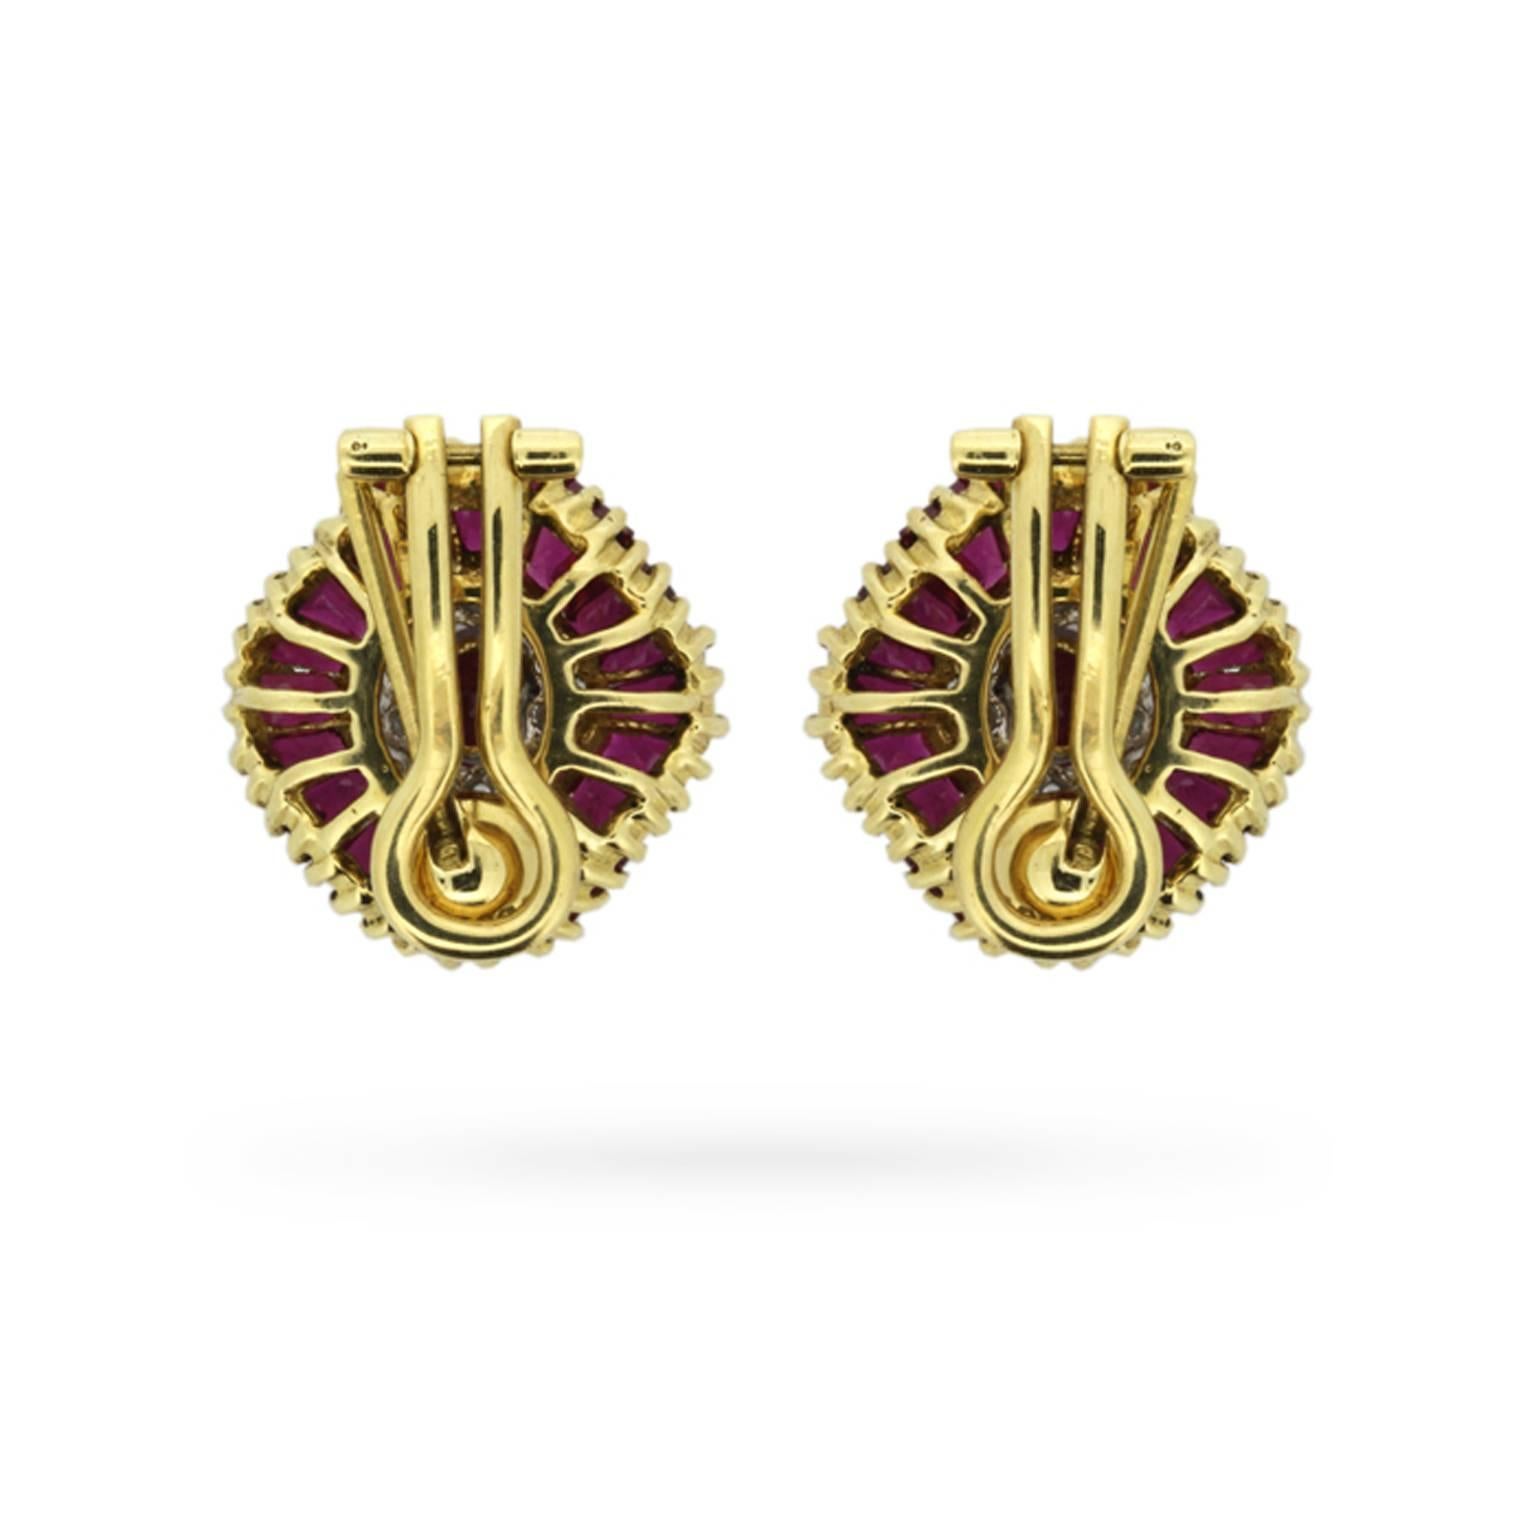 A sensational pair of 1970s ruby and diamond earrings boasting 4.00 carats of sumptuous rubies! These dramatic disco era earrings centre one vertically set oval-shaped ruby inside a concentric row of round brilliant cut diamonds, and a second row of